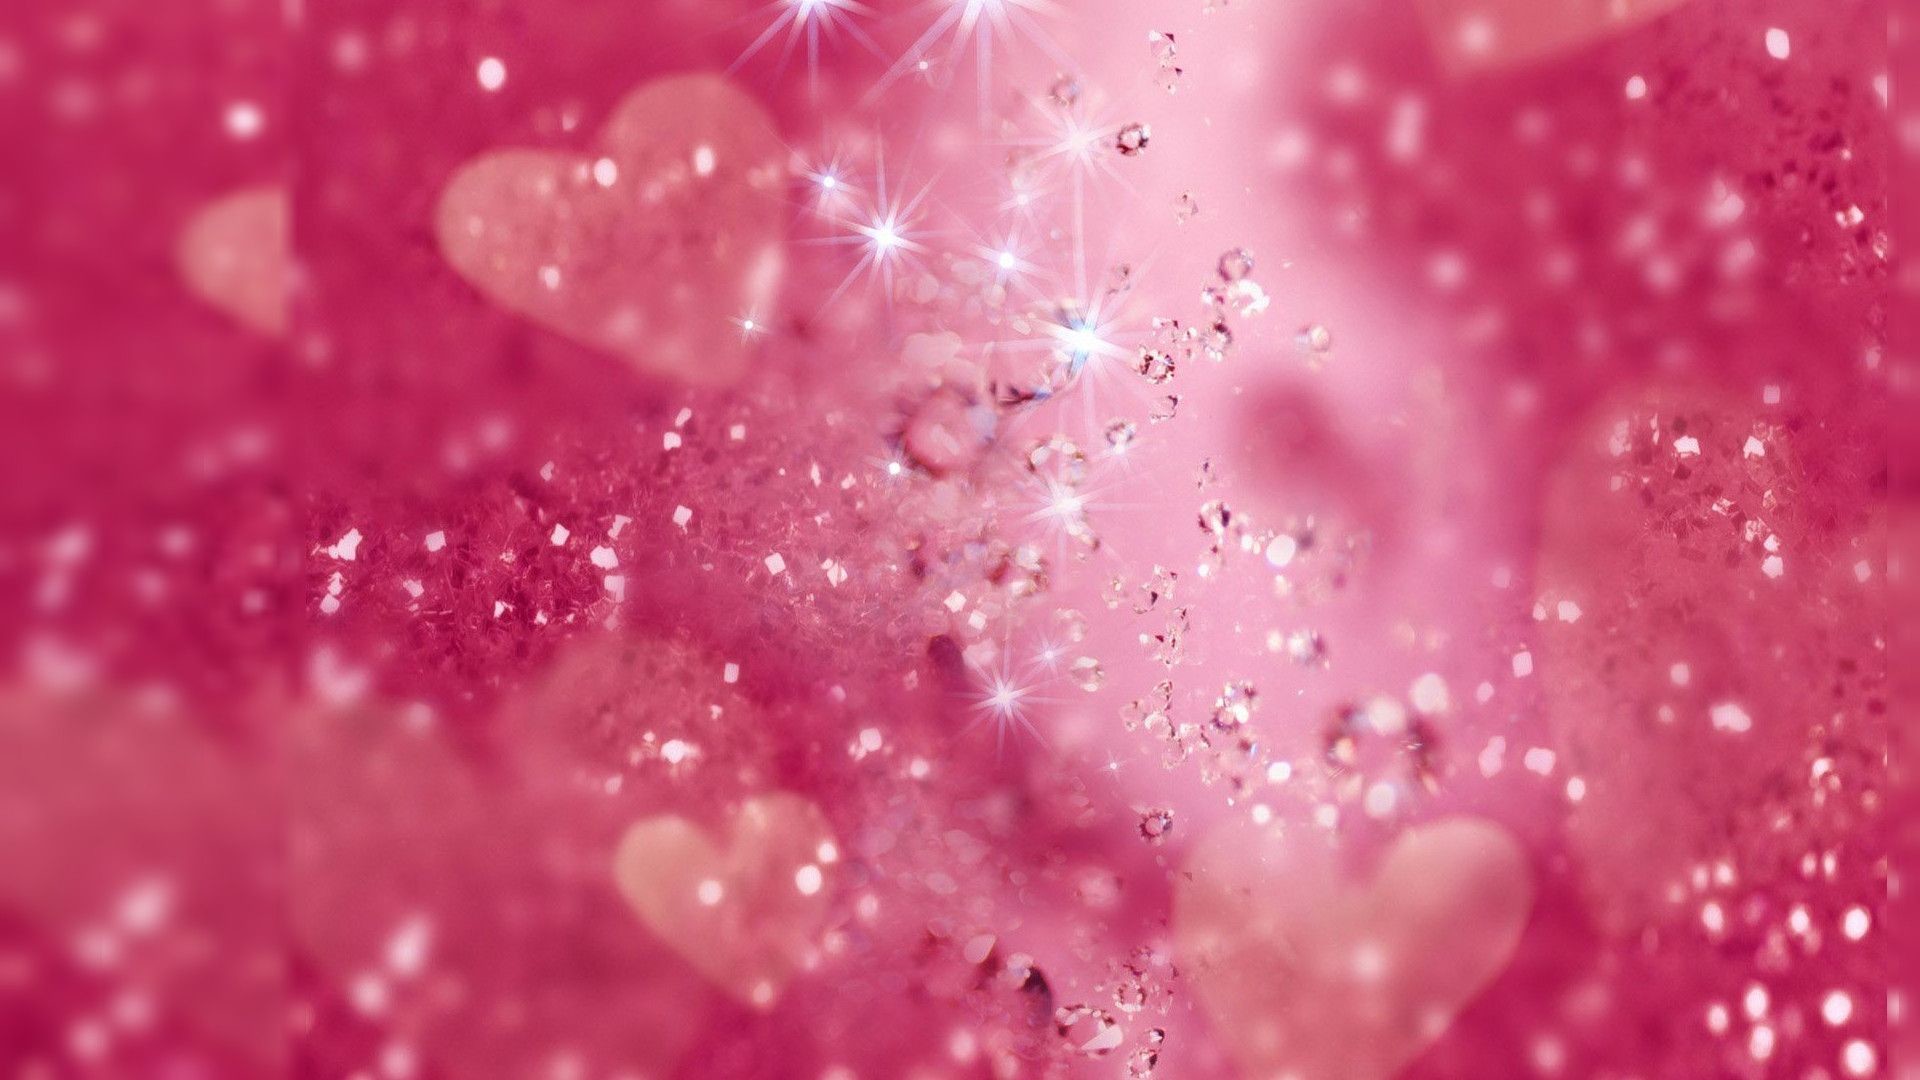 1920x1080 Free Download Pretty Backgrounds Tumblr | Wallpapers, Backgrounds .